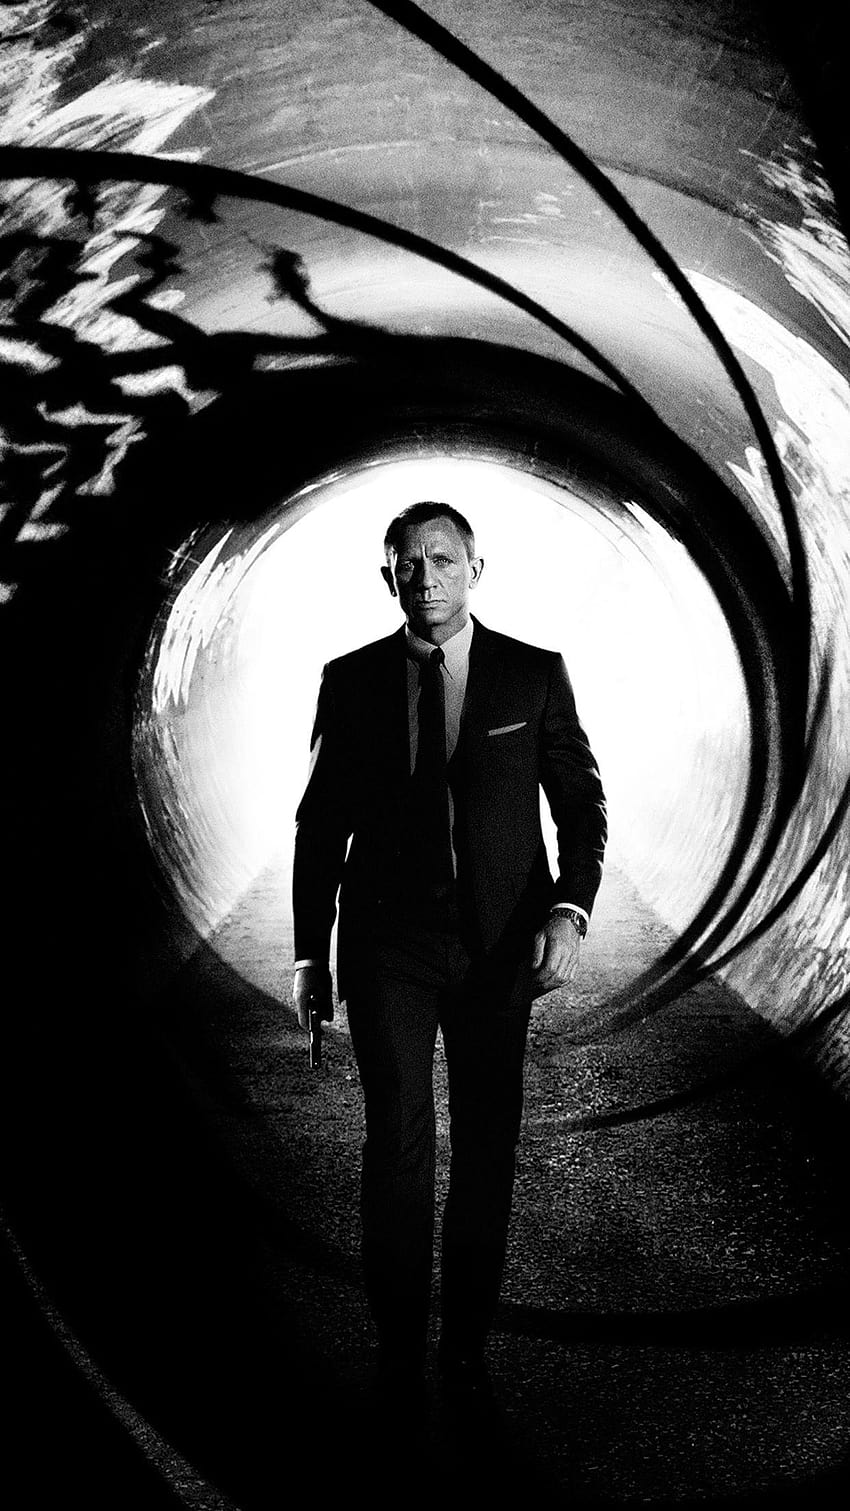 James Bond 007 Skyfall Film Poster Android HD phone wallpaper